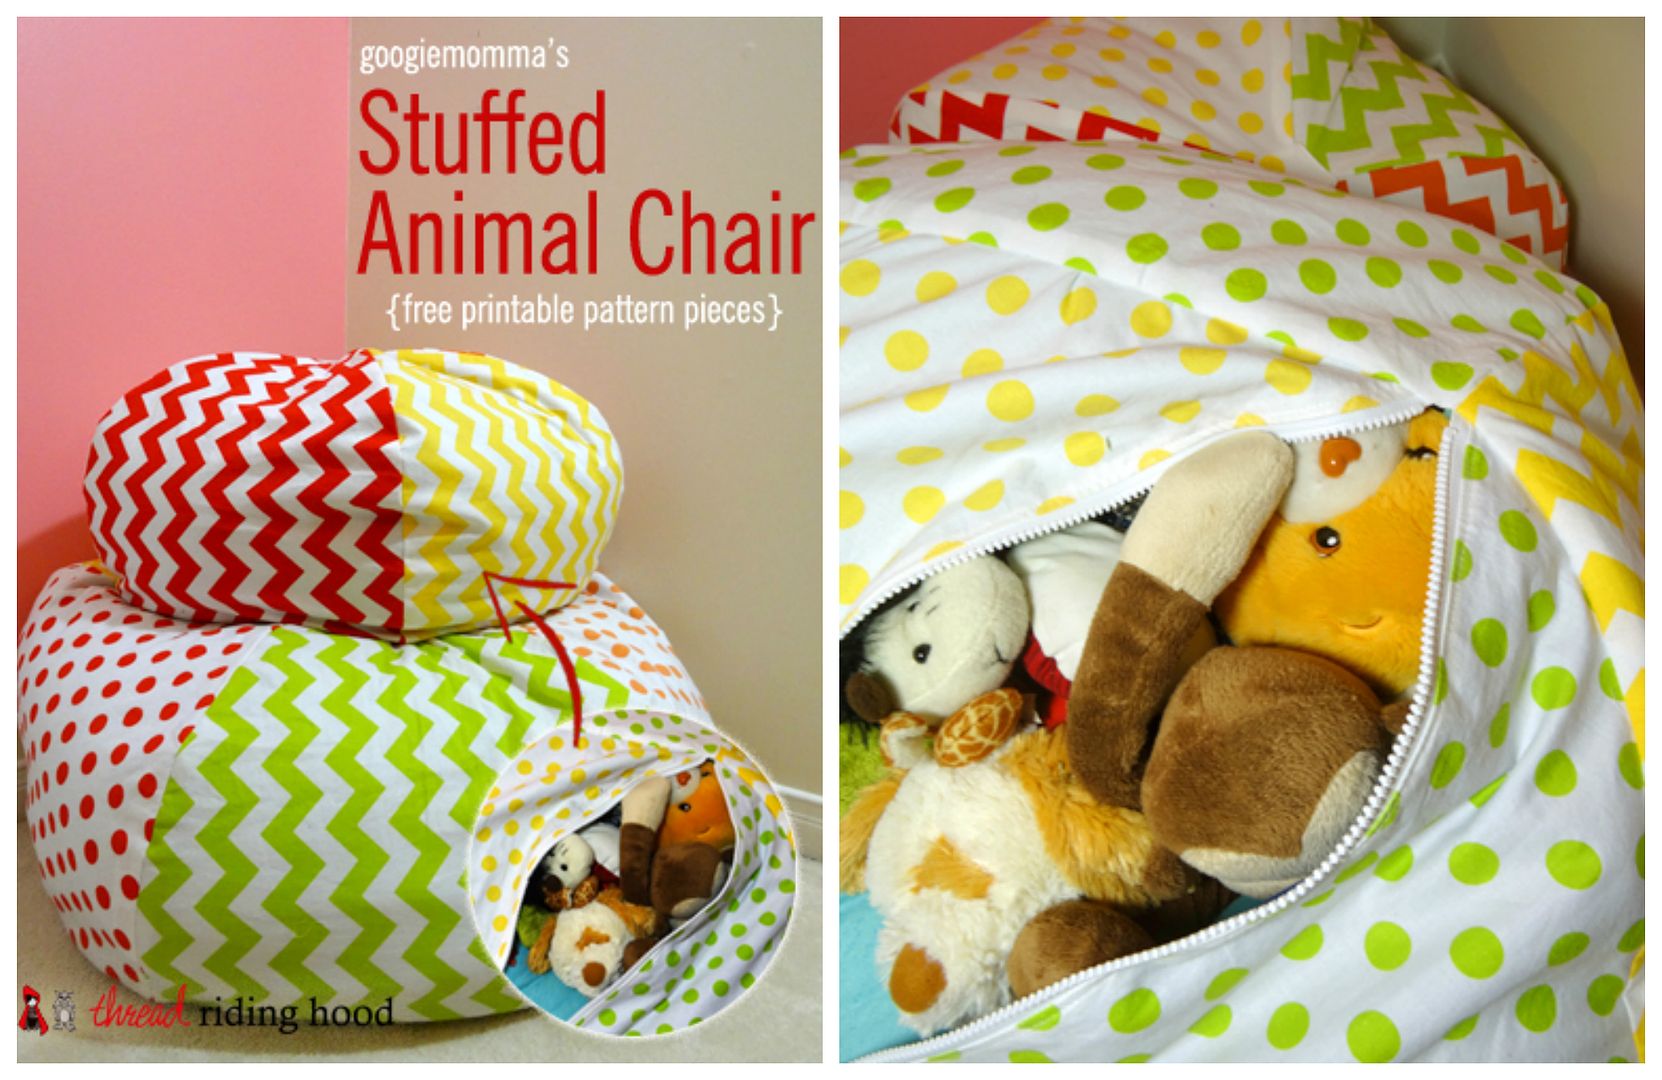 Brilliant stuffed animal storage solution: A DIY for a beanbag chair that keeps plush friends out of sight when not in use